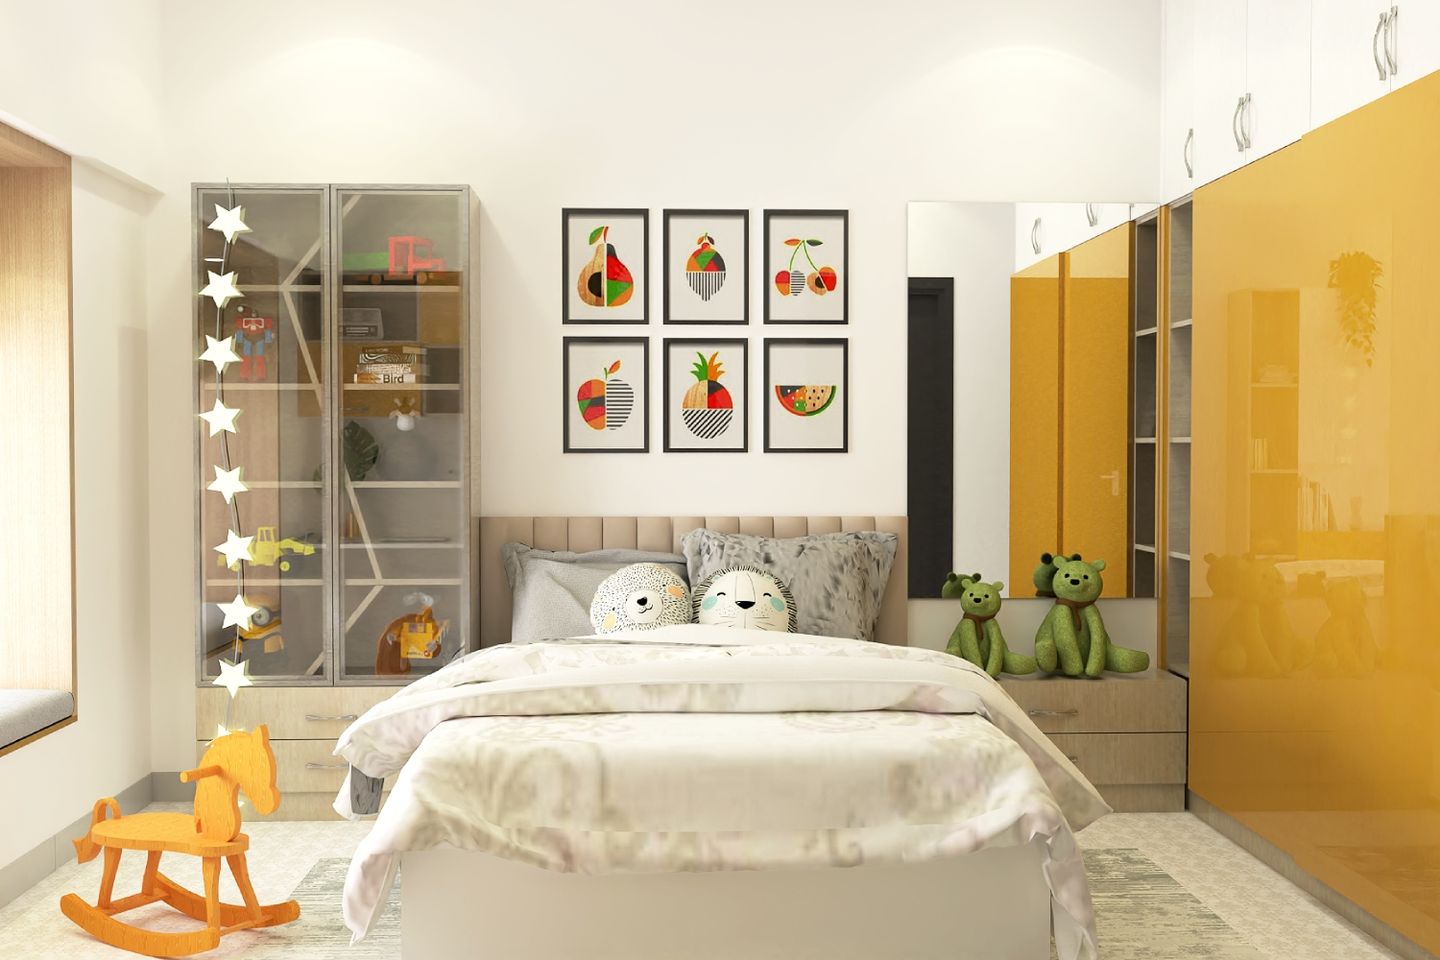 Kids Bedroom Design With Decorated Picture Frame Wall And Glossy Wardrobe - Livspace